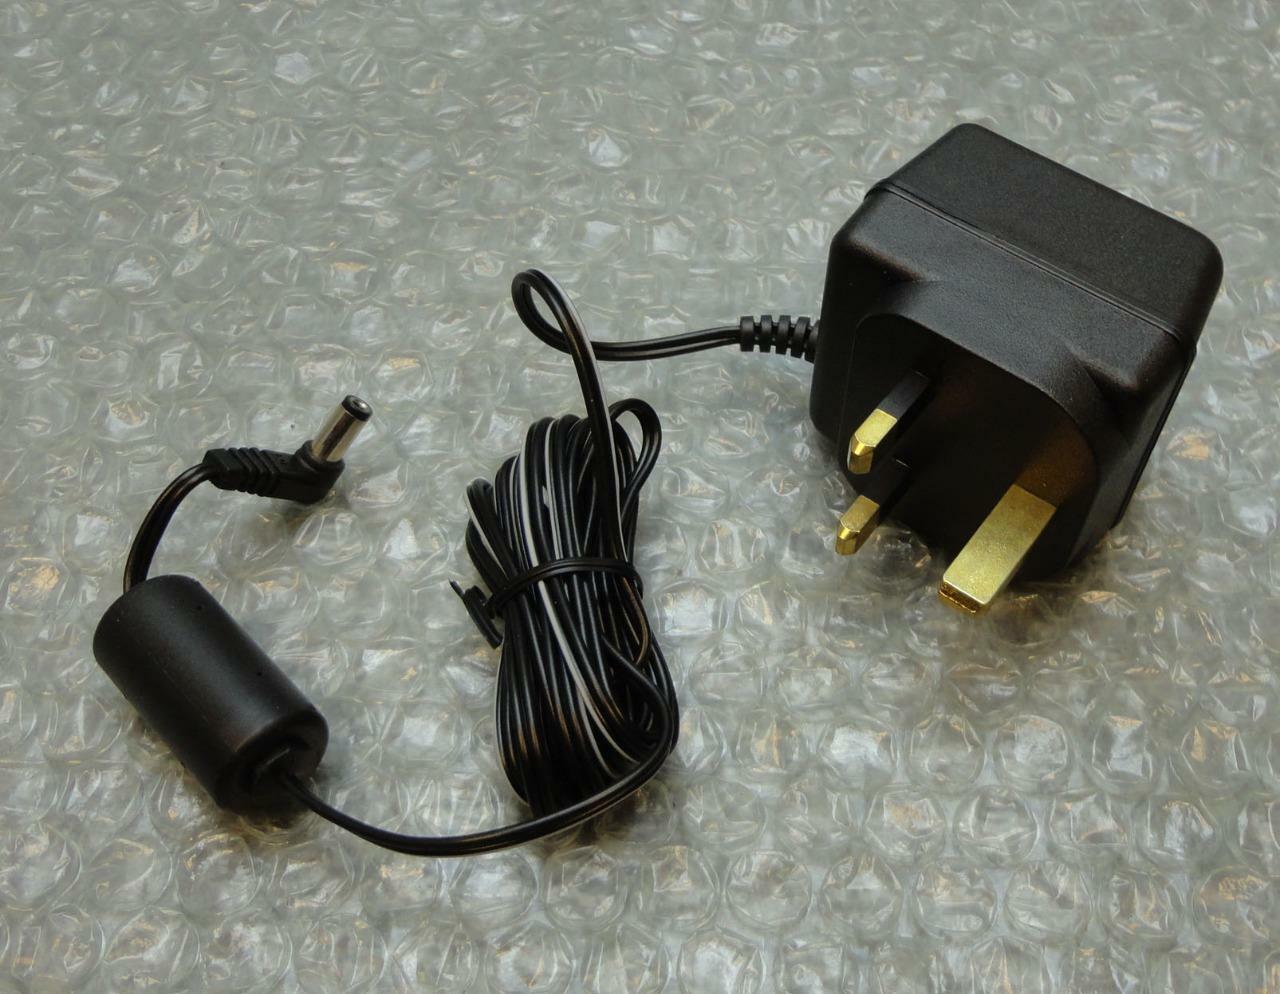 New T35-9-300C-3 AC Adapter For BIS1901A Reader 9V - 300mA / 0.3mA Power Supply MPN: T35-9-300C-3 Brand: Unbranded/